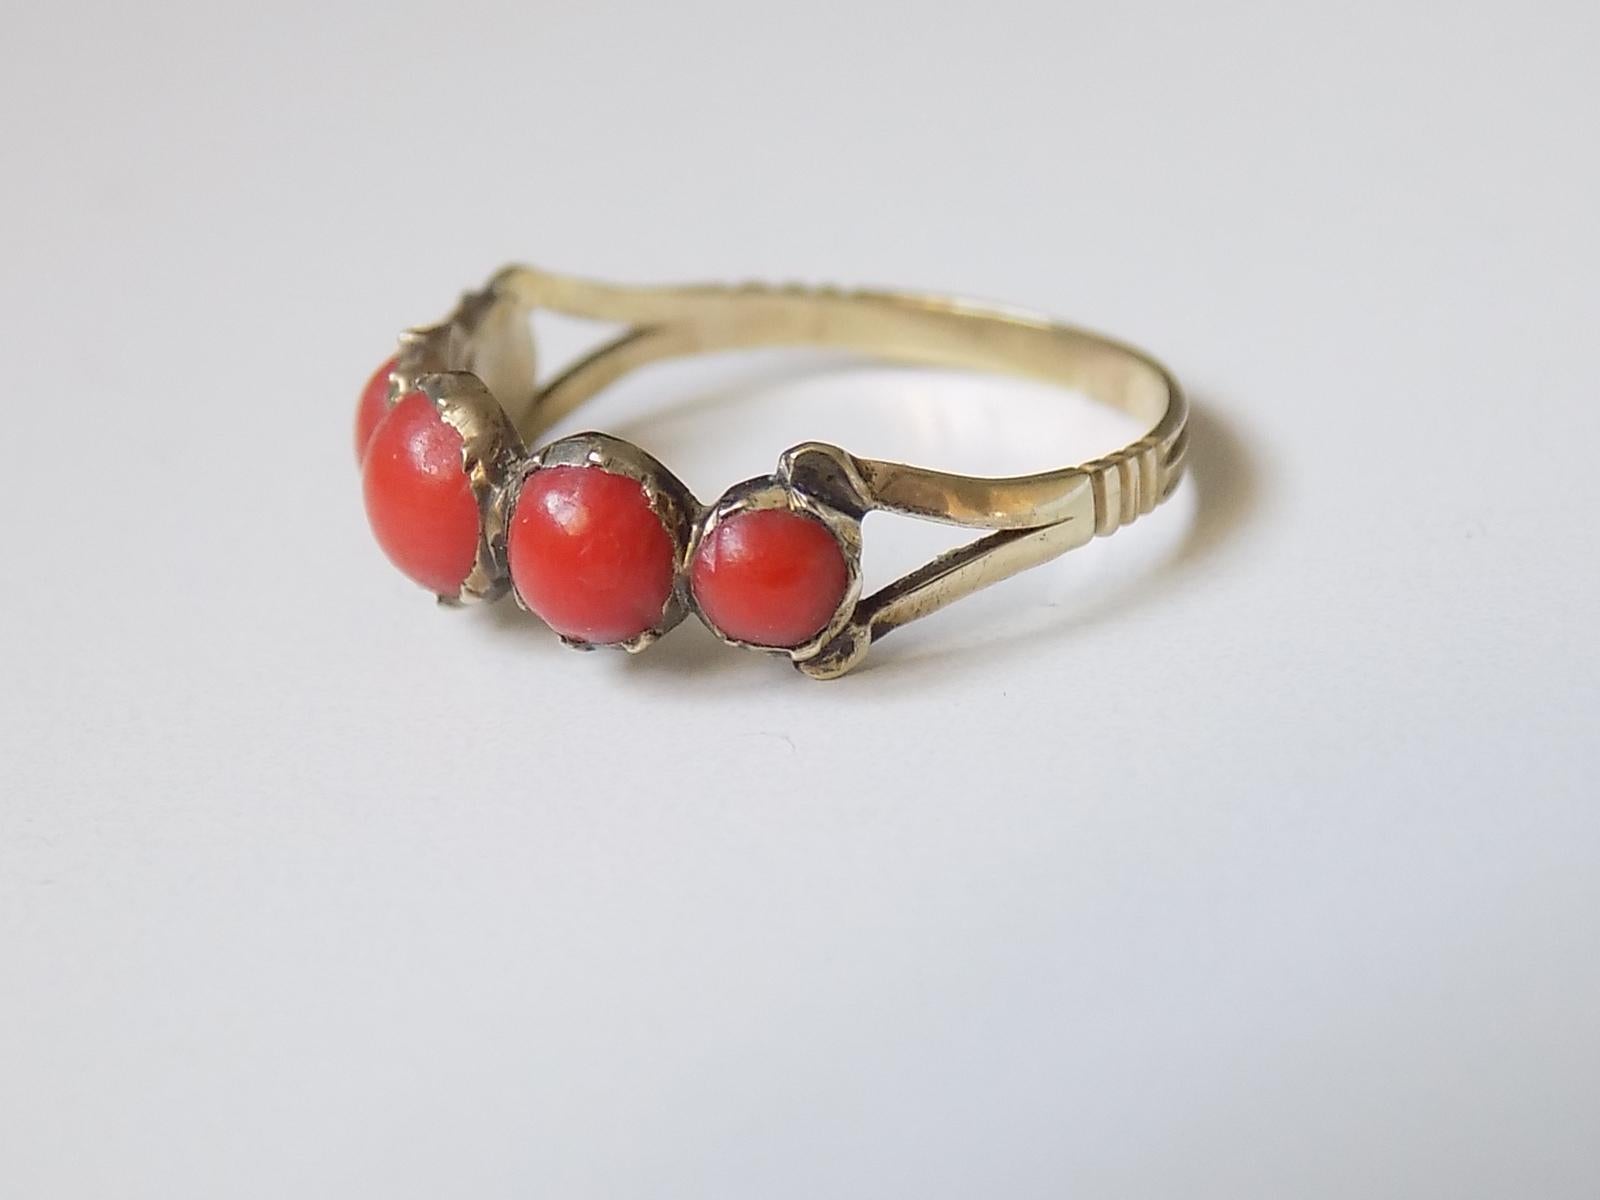 Lovely Georgian c.1800 Gold and Coral half eternity ring. English origin.
Size O UK, 7.5 US.
Height of the face 6mm.
Weight 1.4gr.
Unmarked.